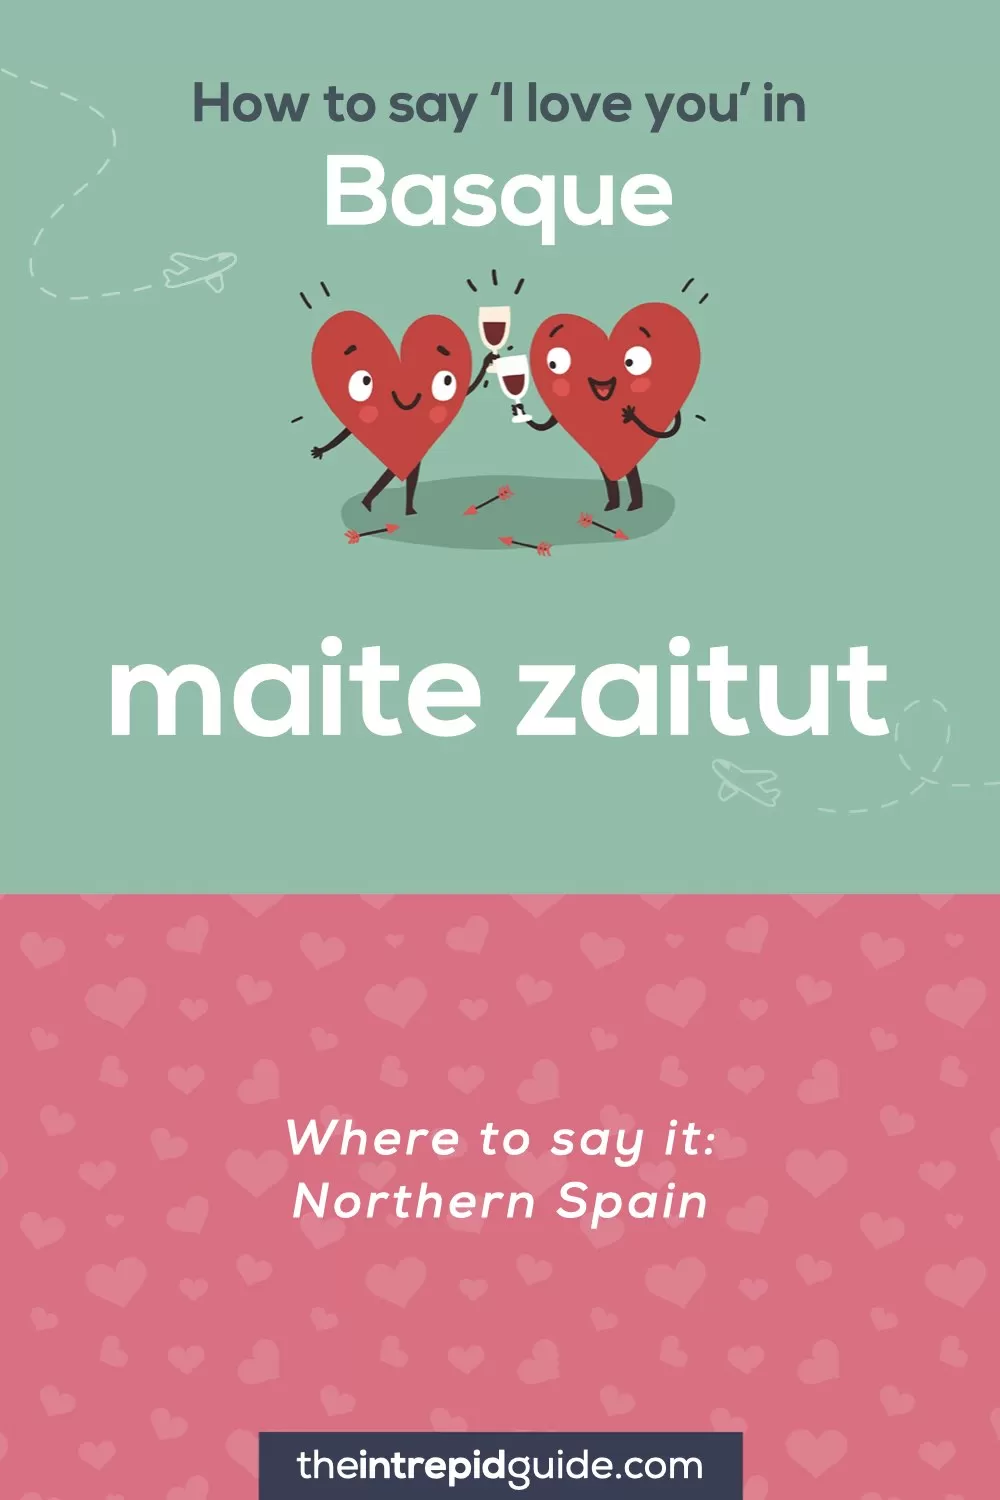 How to say I love you in different languages - Basque - maite zaitut